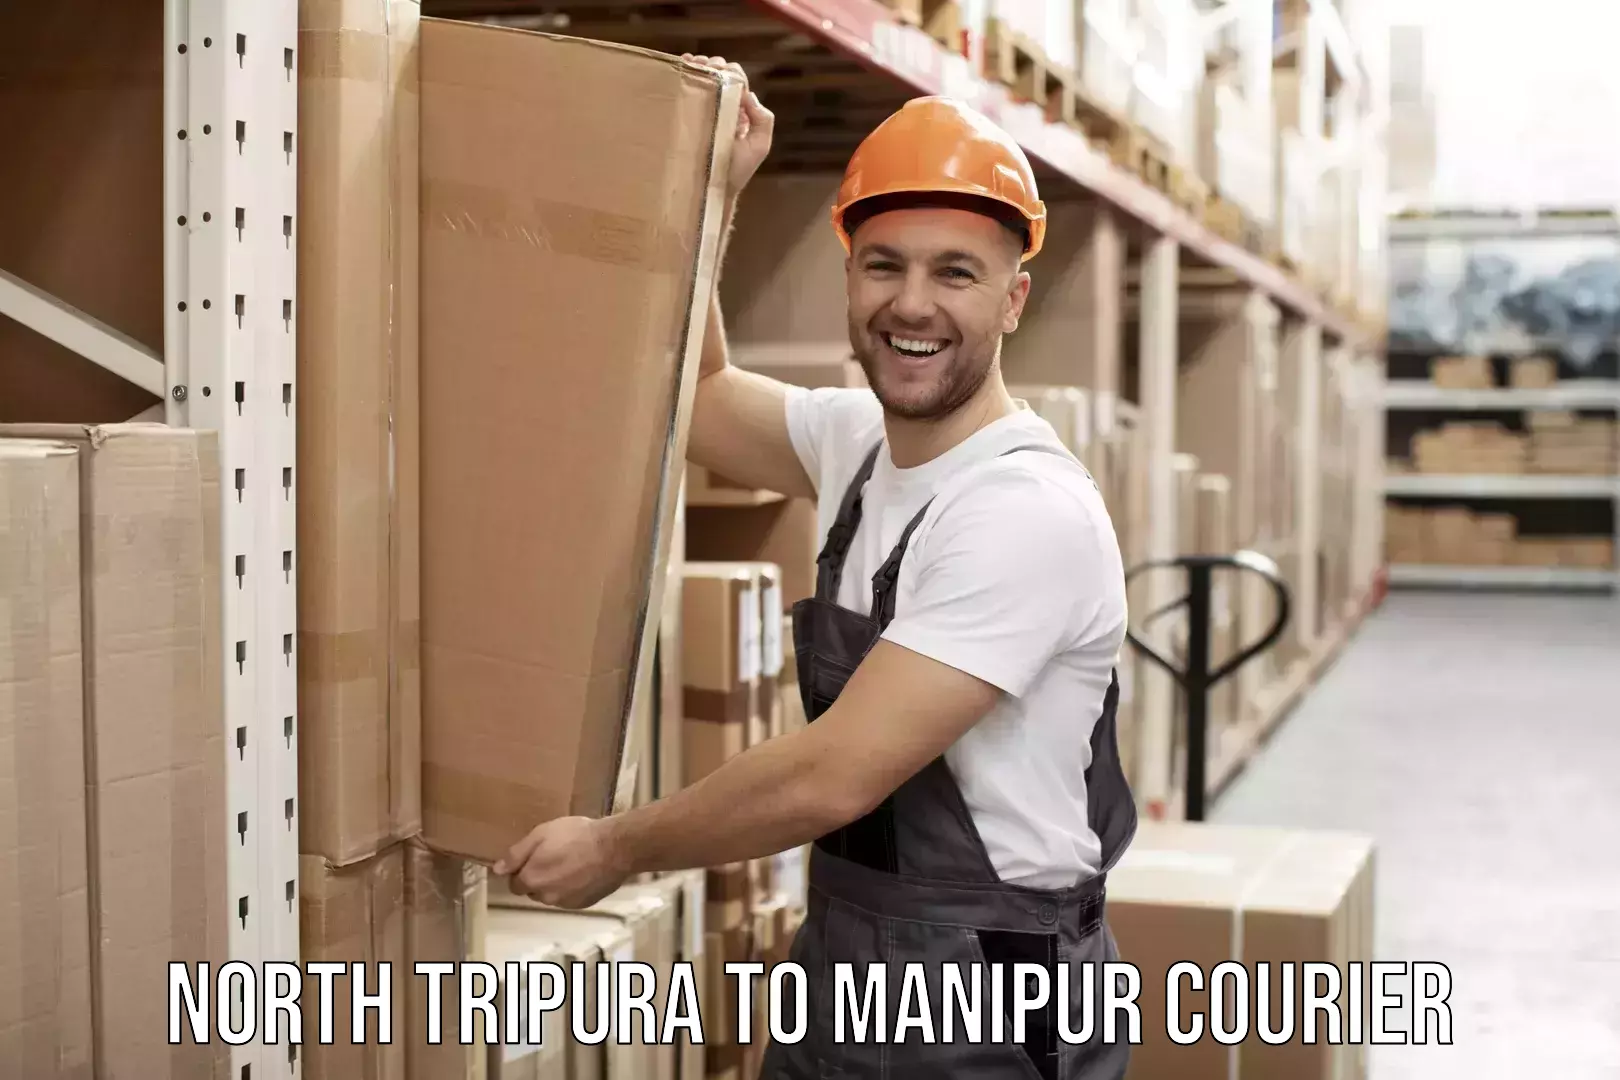 Furniture delivery service North Tripura to Imphal